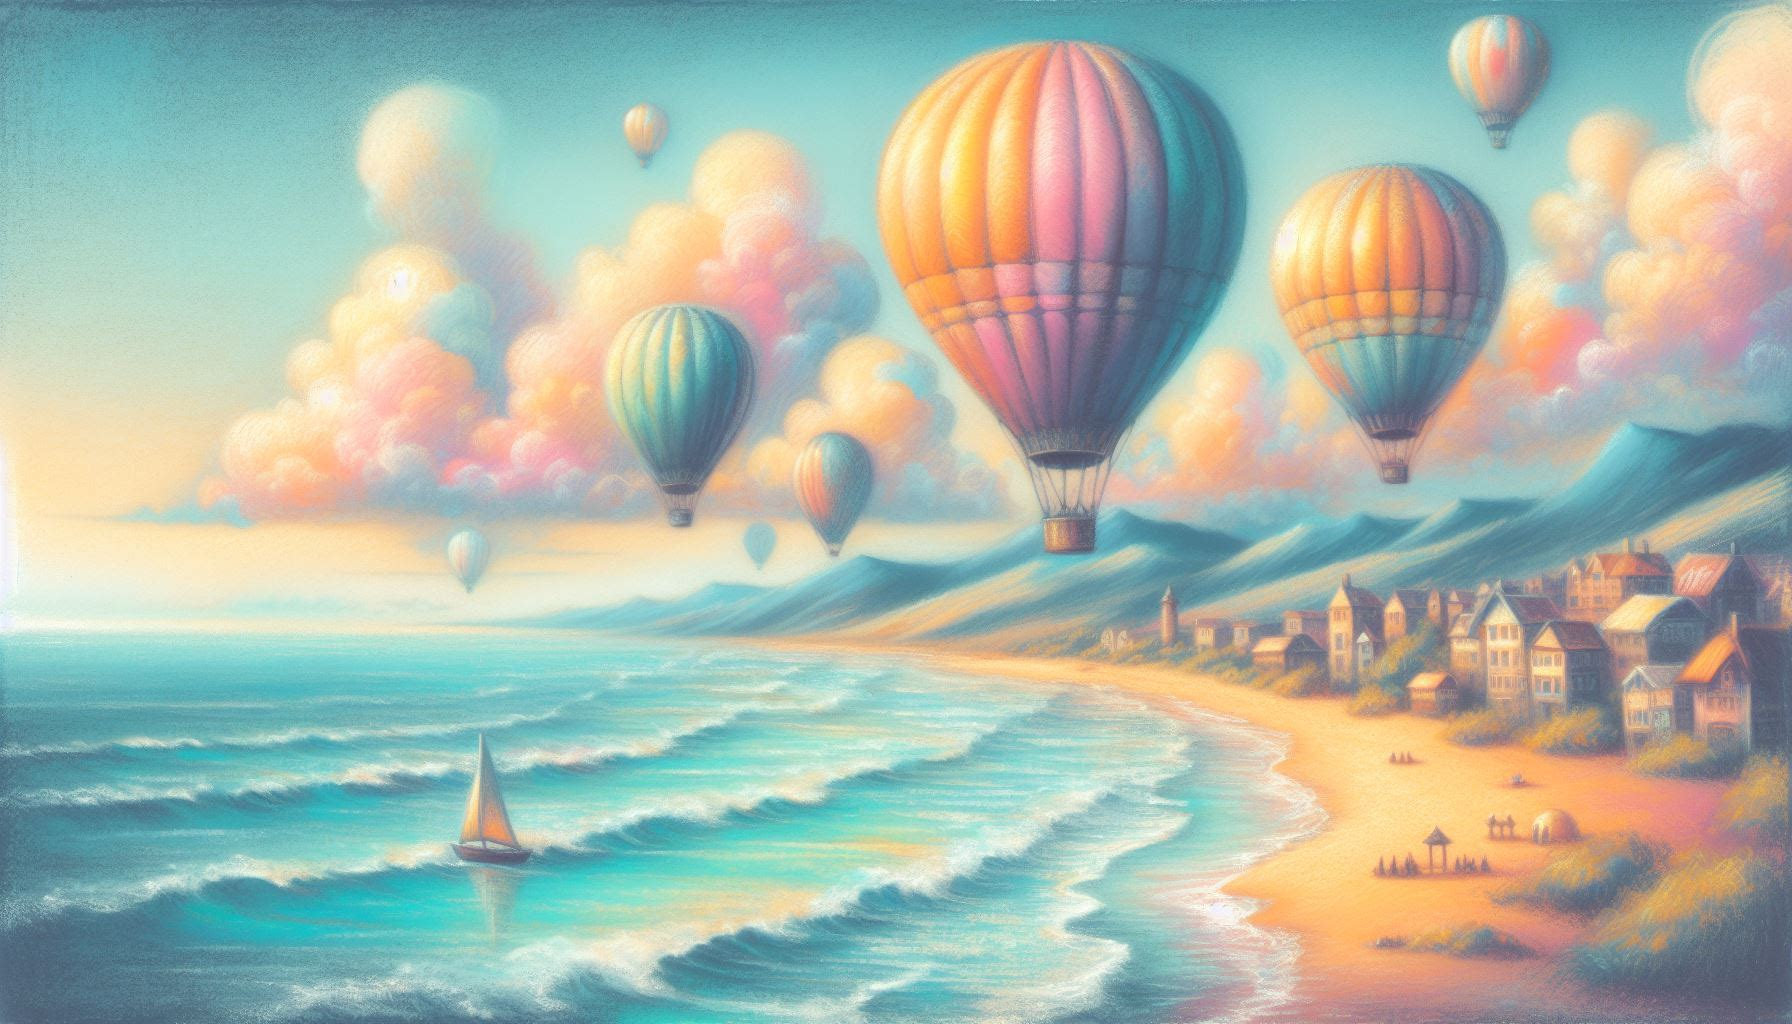 Pastel image of hot air balloons over the ocean